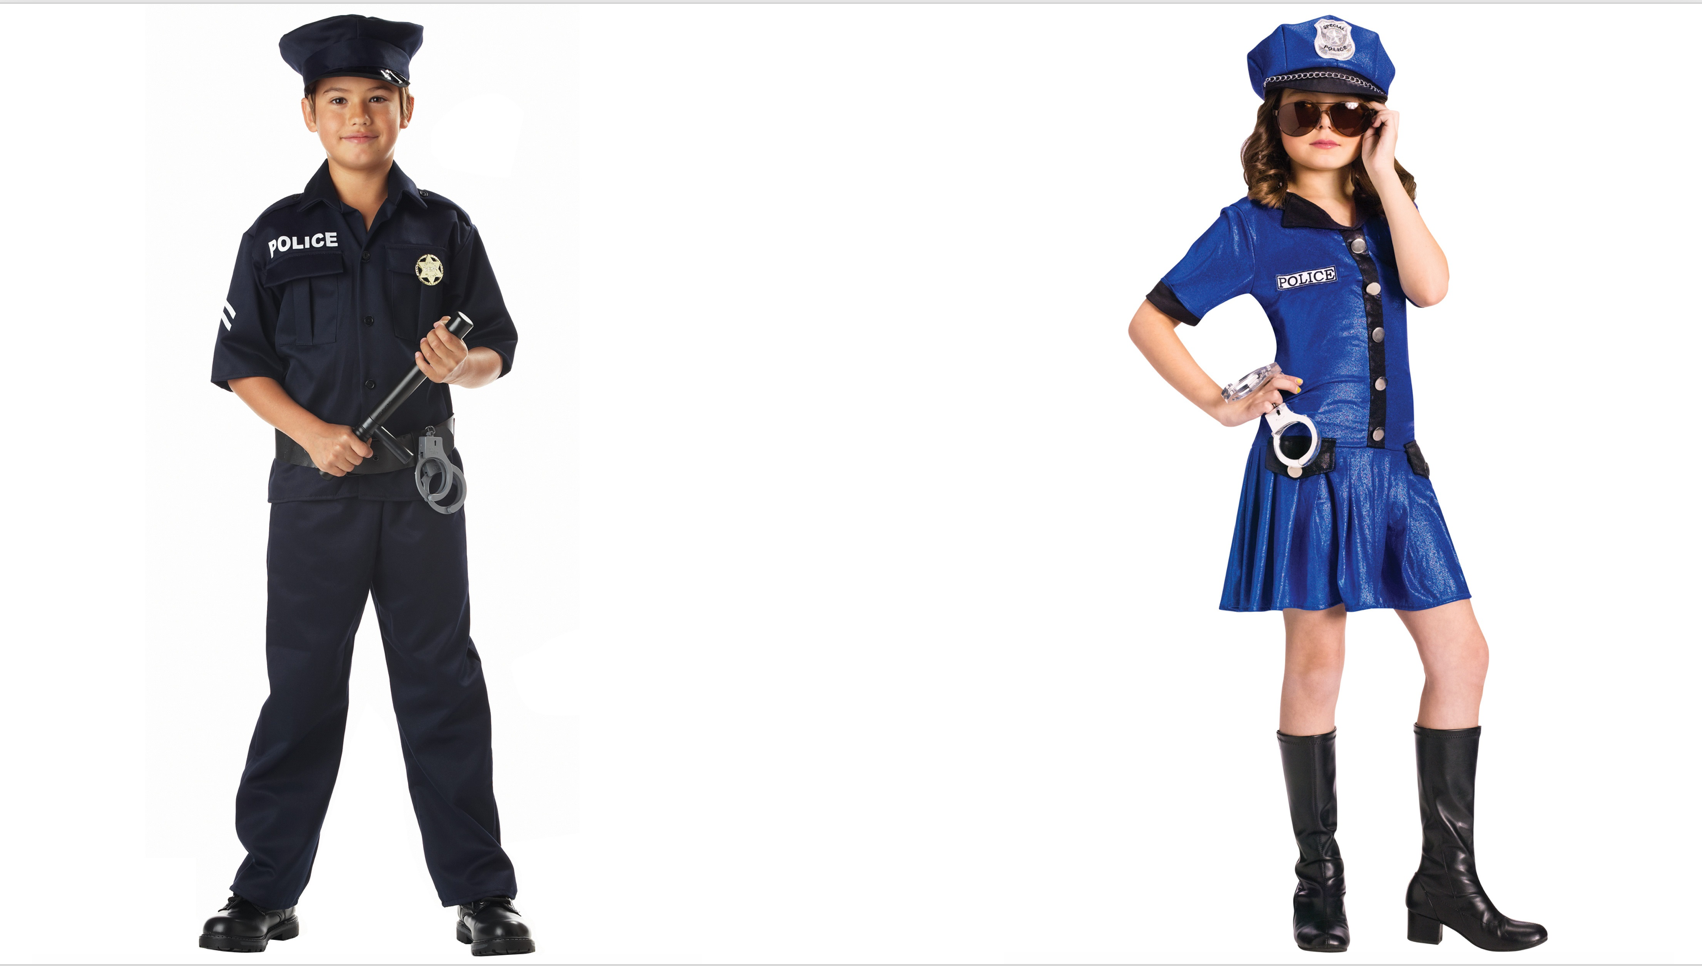 My Pre-Teen Daughters Halloween Costumes Terrify Me by Marshall Brickeen The Haven Medium image picture